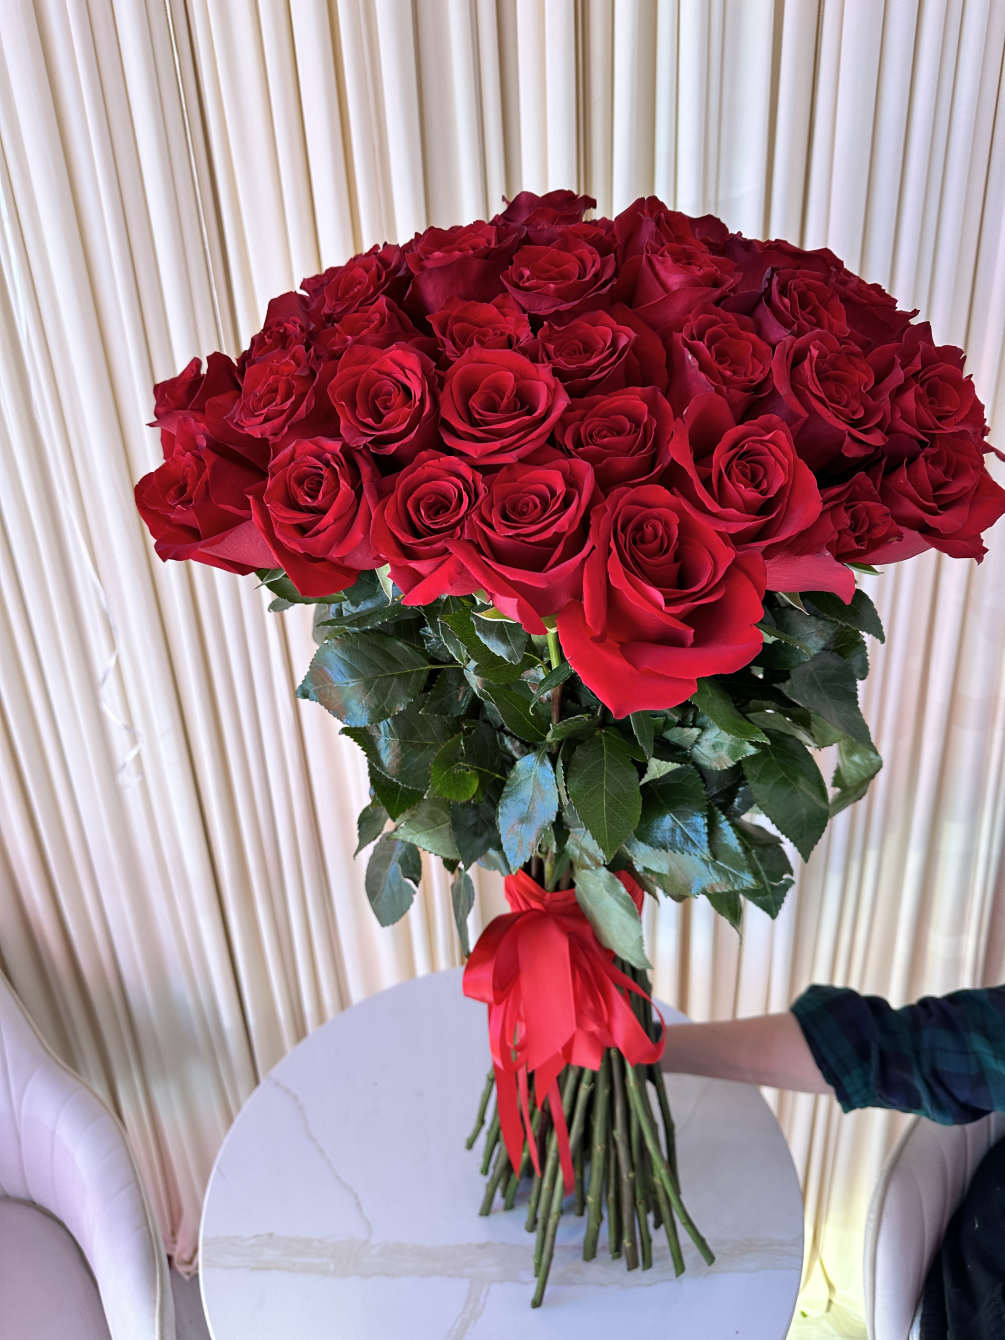 Celebrate love&#039;s symphony with this breathtaking bouquet of 50 radiant red roses.